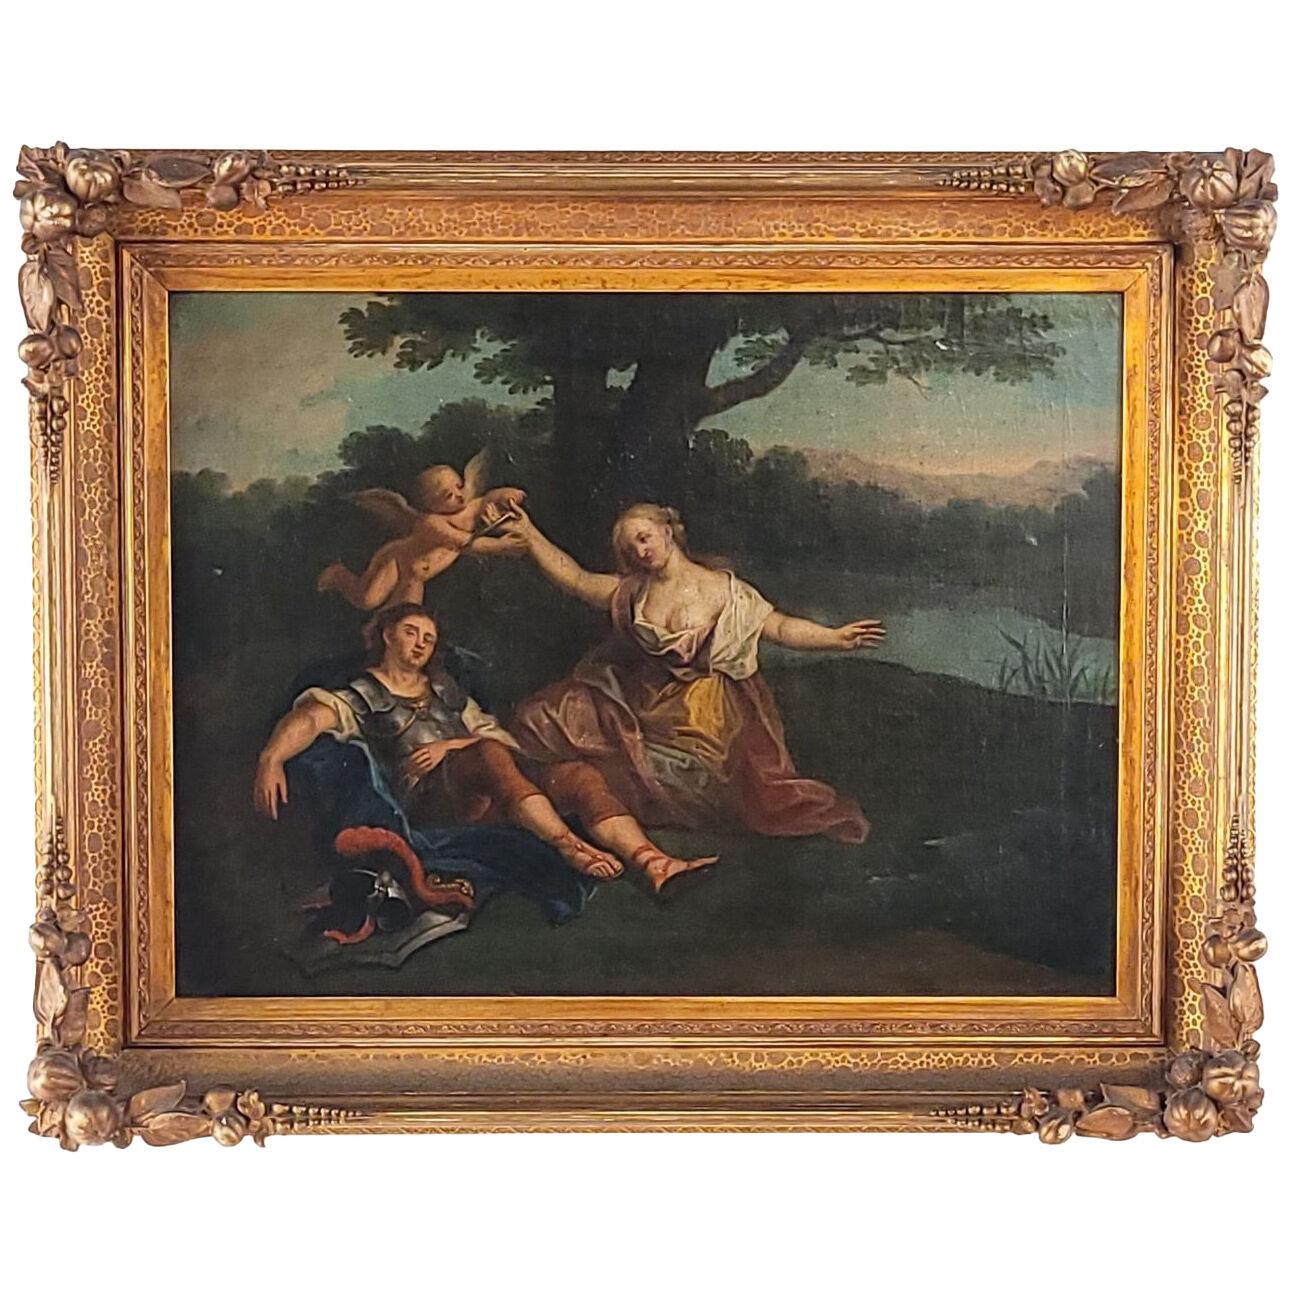 Allegorical Painting, French School, 17th or 18th century